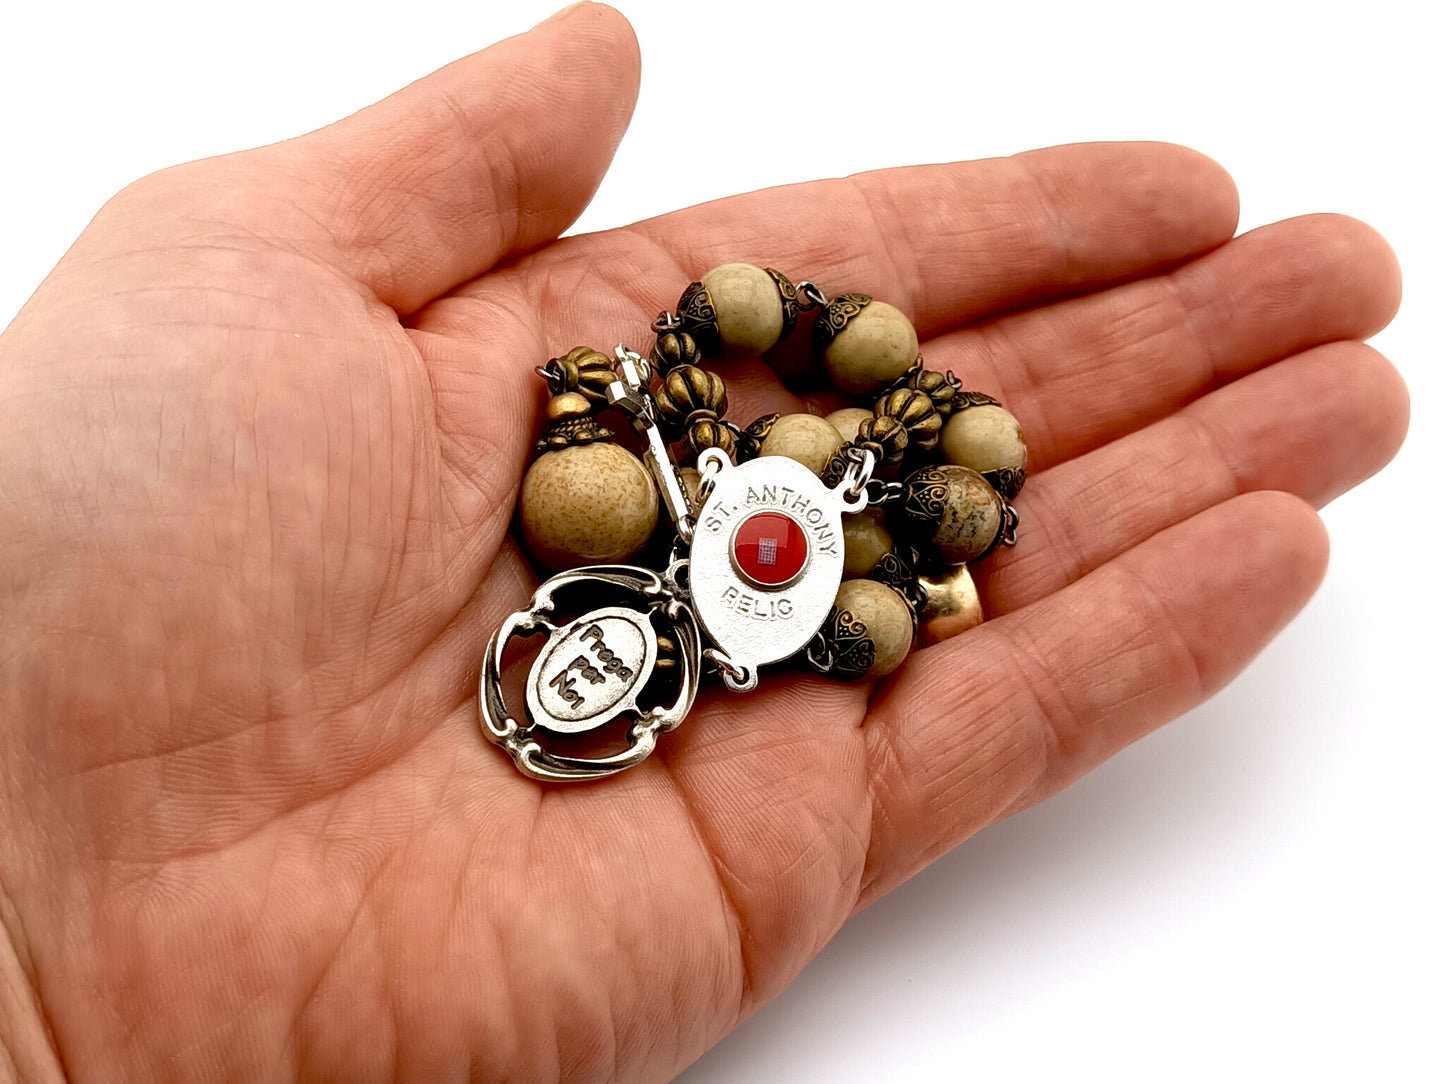 Saint Anthony unique rosary beads prayer chaplet with beige jasper gemstone beads, silver Saint Benedict crucifix and Saint Anthony relic medal.